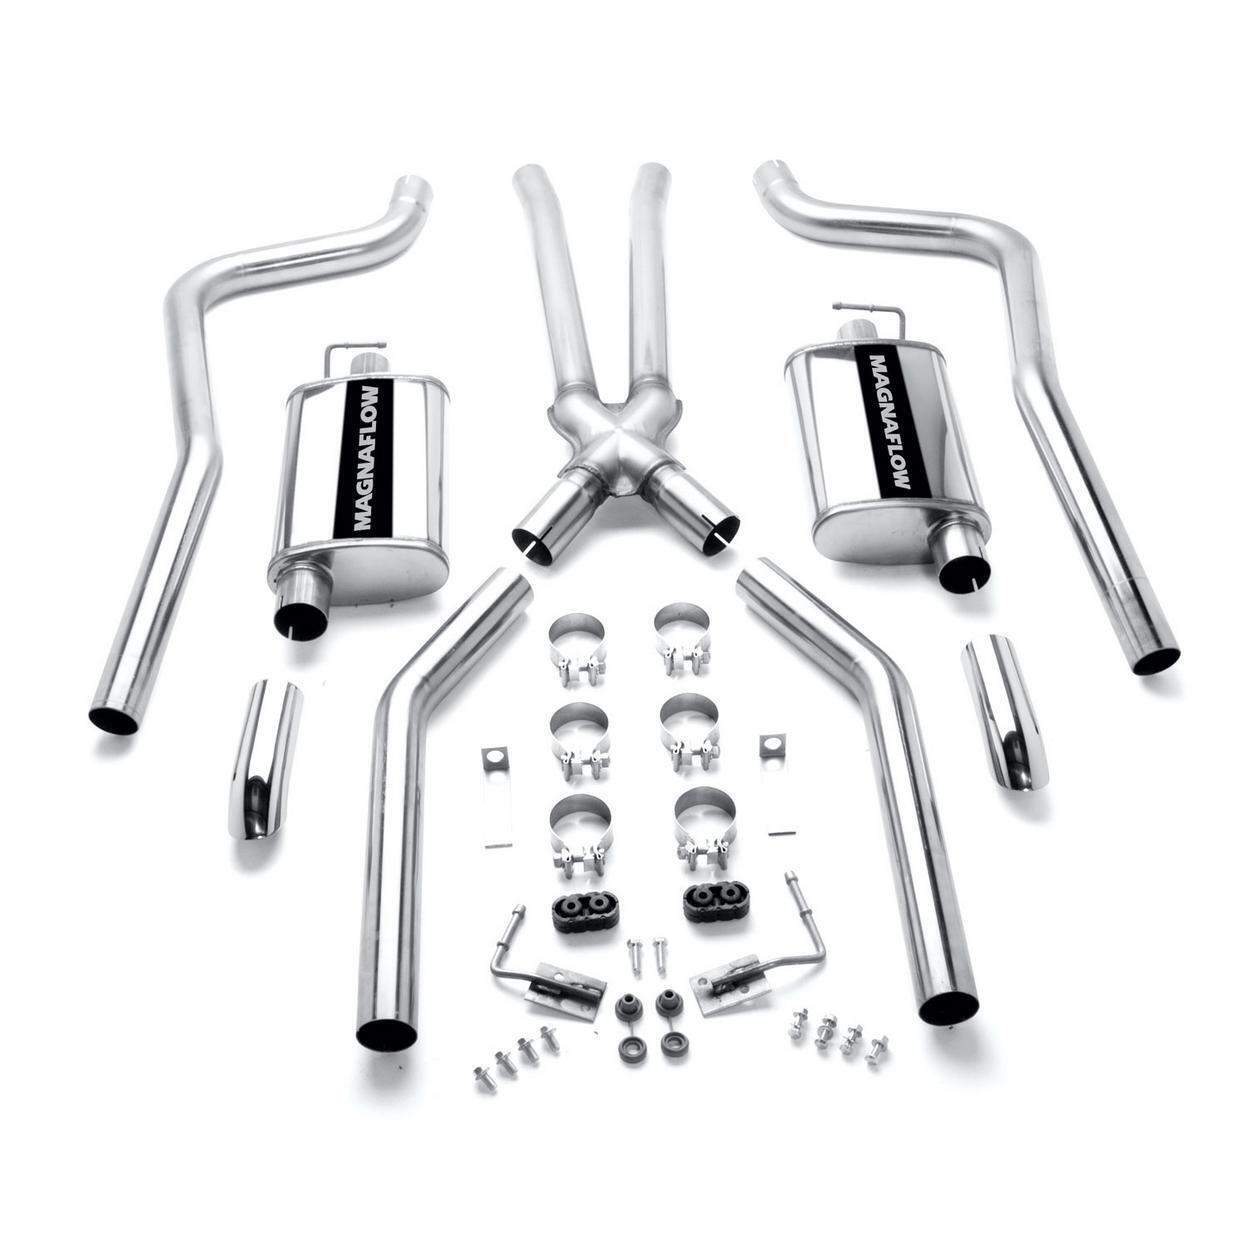 Magnaflow Exhaust System Kit for 1970 Plymouth Barracuda